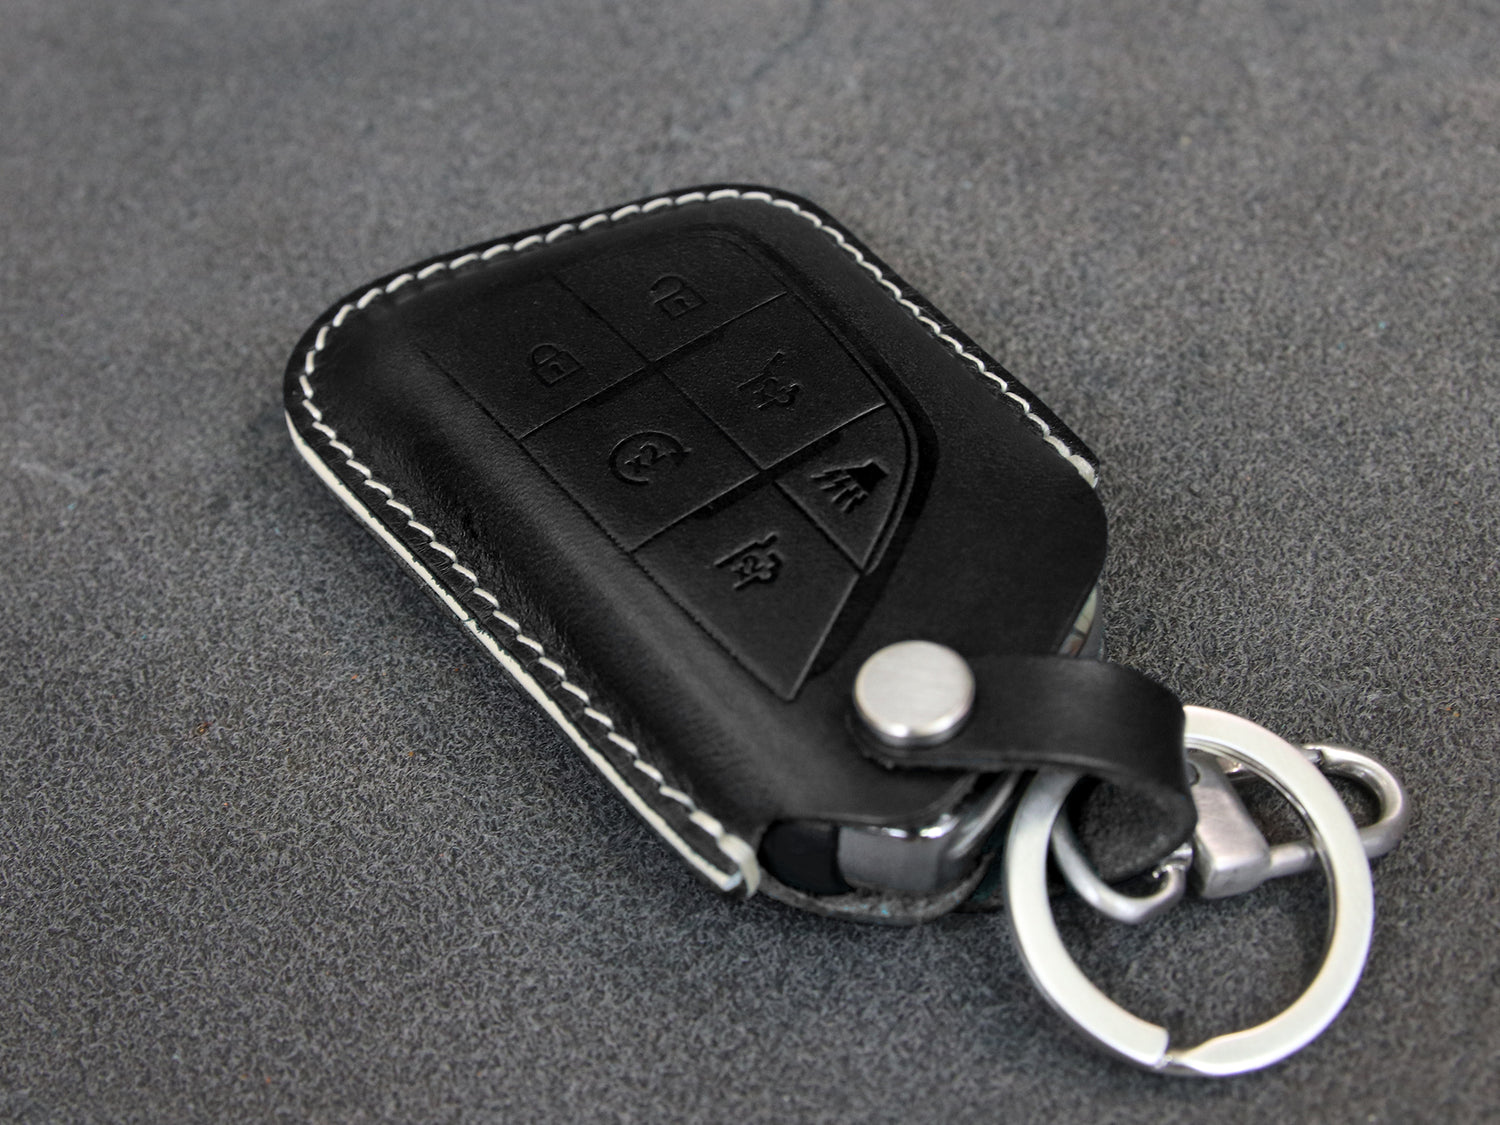 Cadillac [2-6] Escalade Key Fob Leather Case - Italian Veg-Tanned Leather -6 Buttons